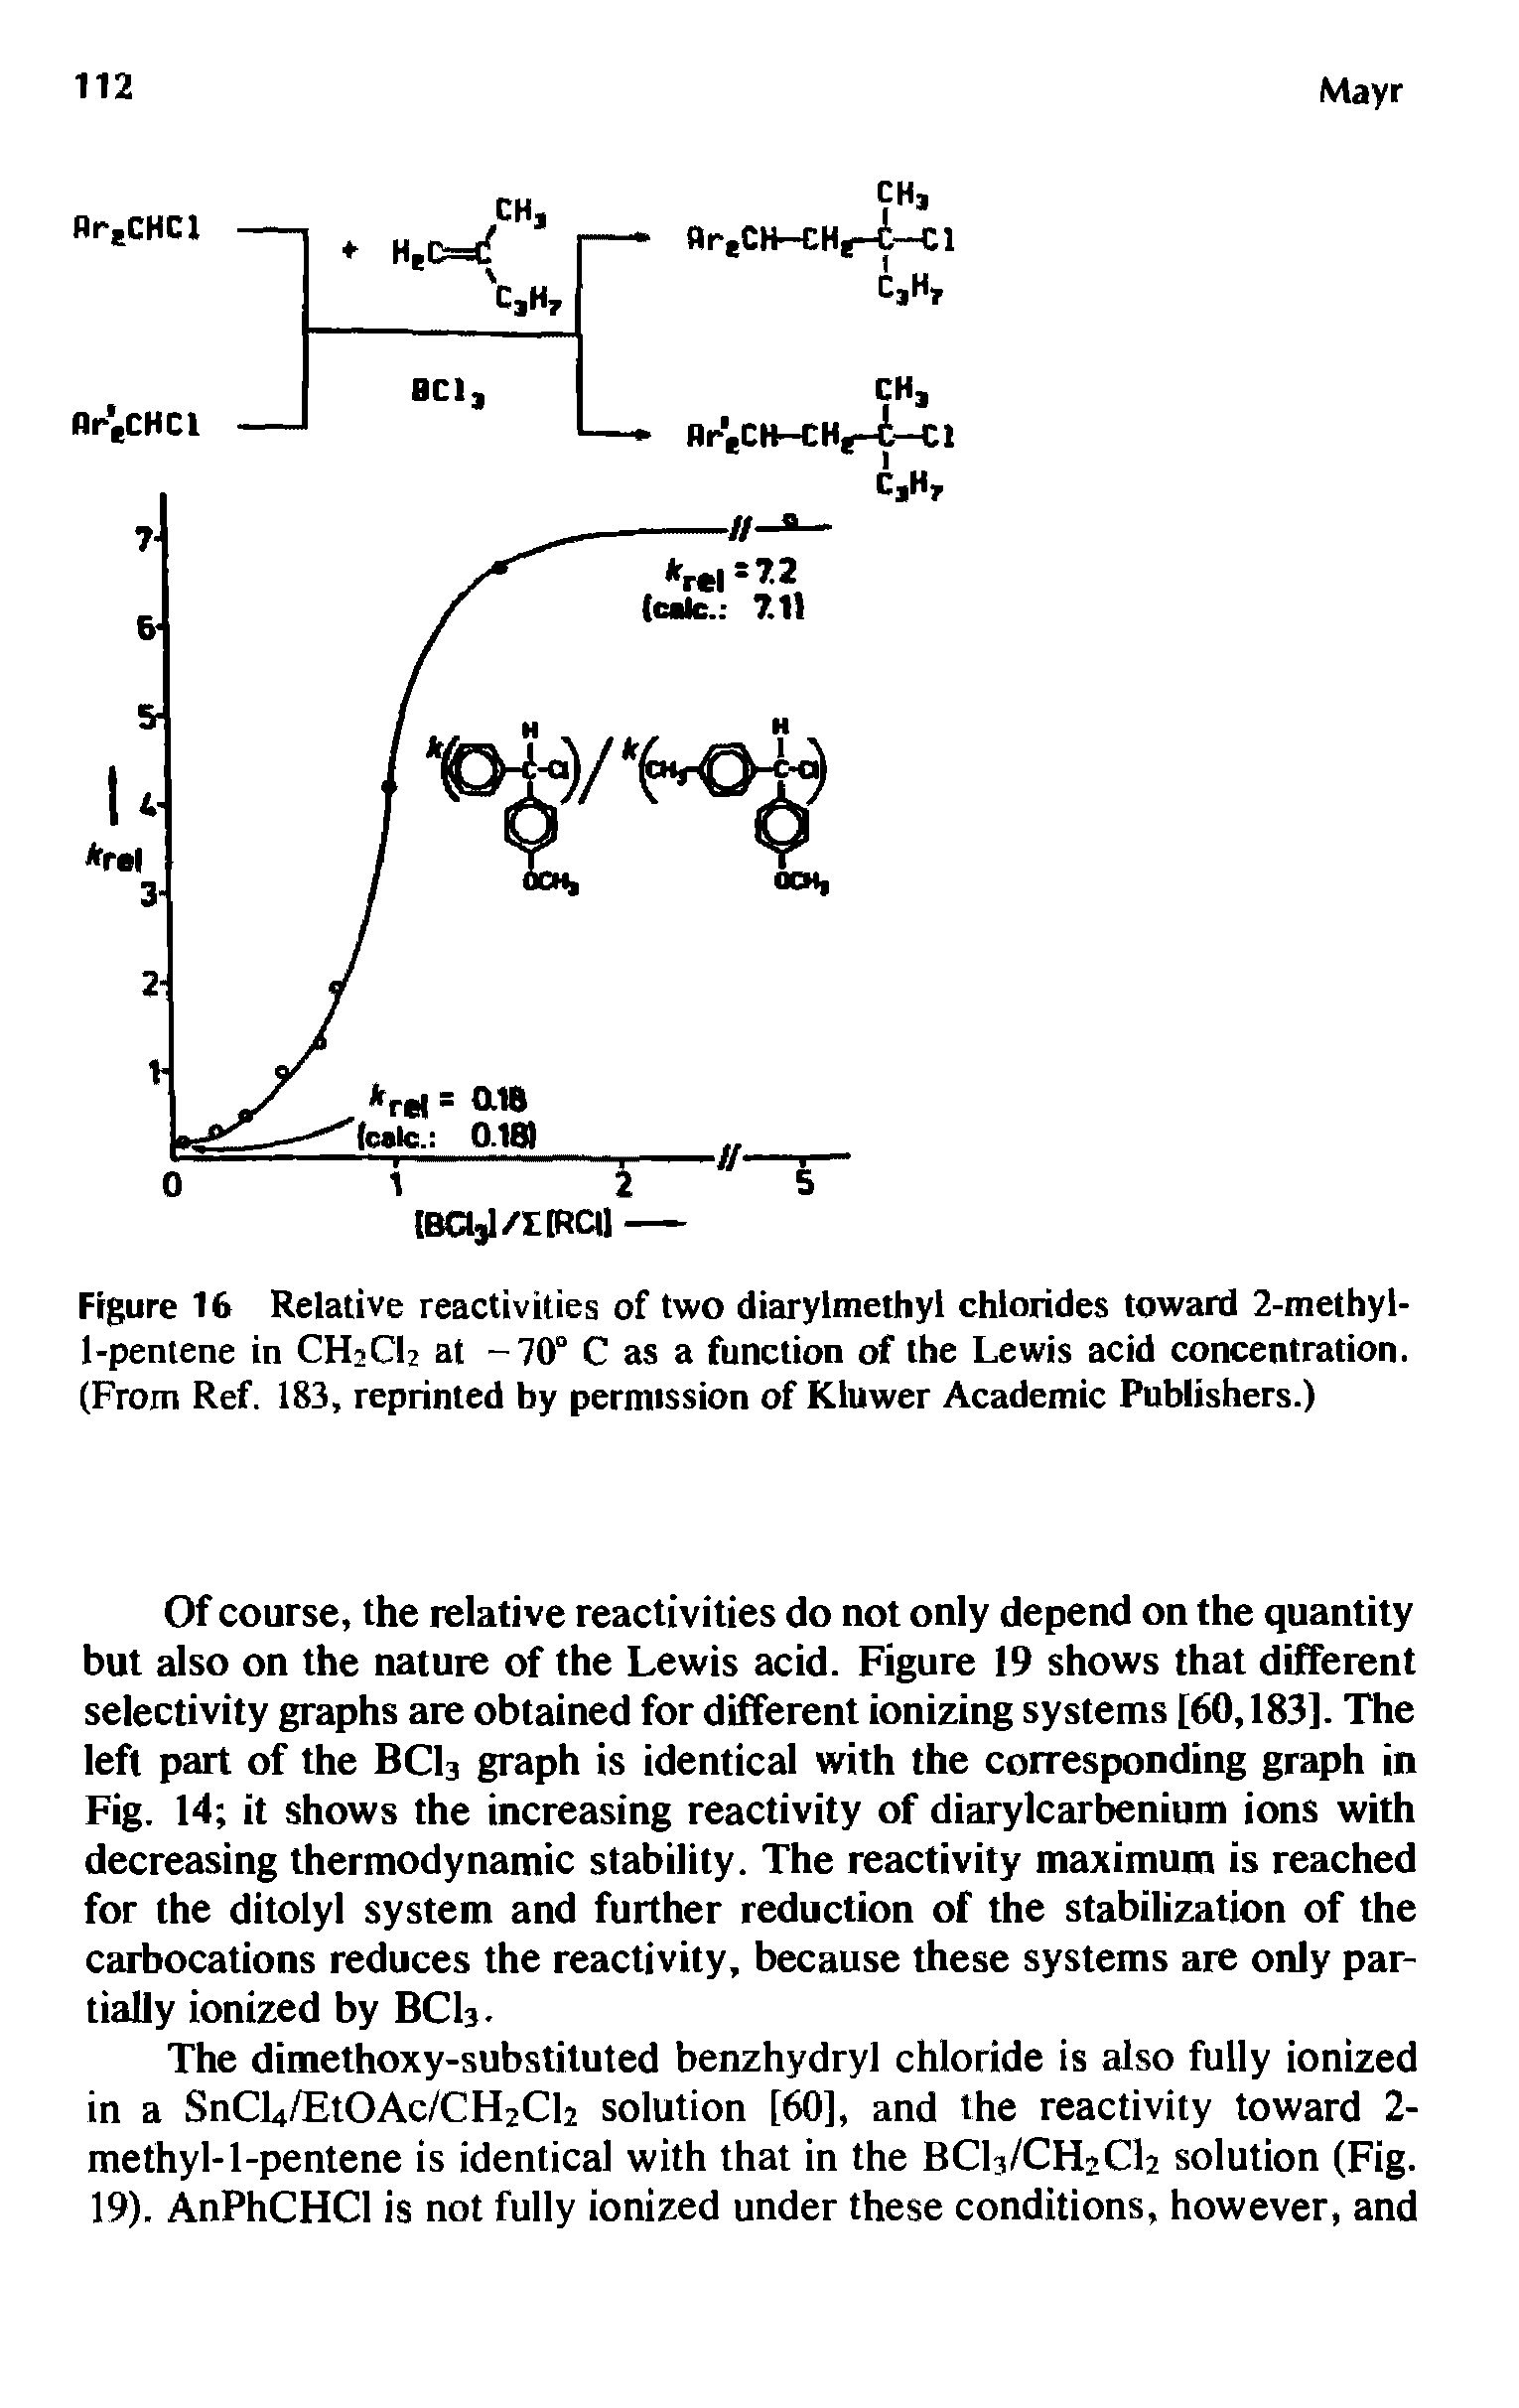 Figure 16 Relative reactivities of two diarylmethyl chlorides toward 2-methyl-1-pentene in CH2O2 at -70° C as a function of the Lewis acid concentration. (From Ref. 183, reprinted by permission of Kluwer Academic Publishers.)...